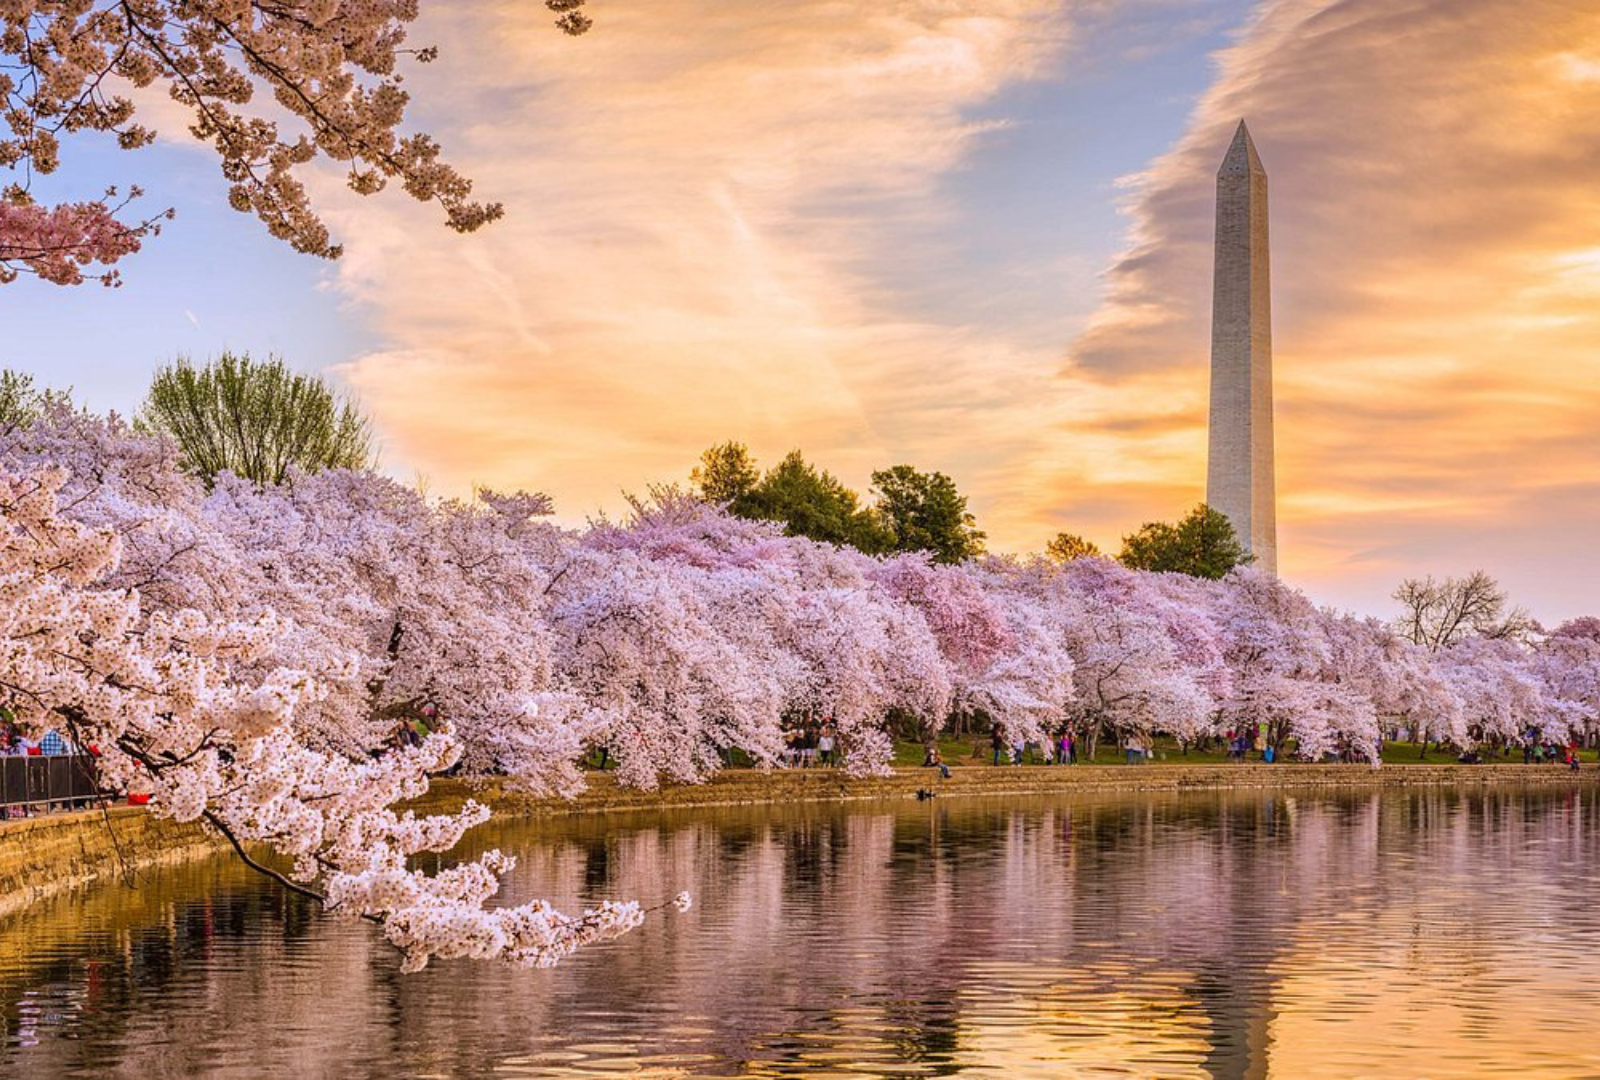 Cherry blossoms with the Washington Monument in the background in Washington, D.C.